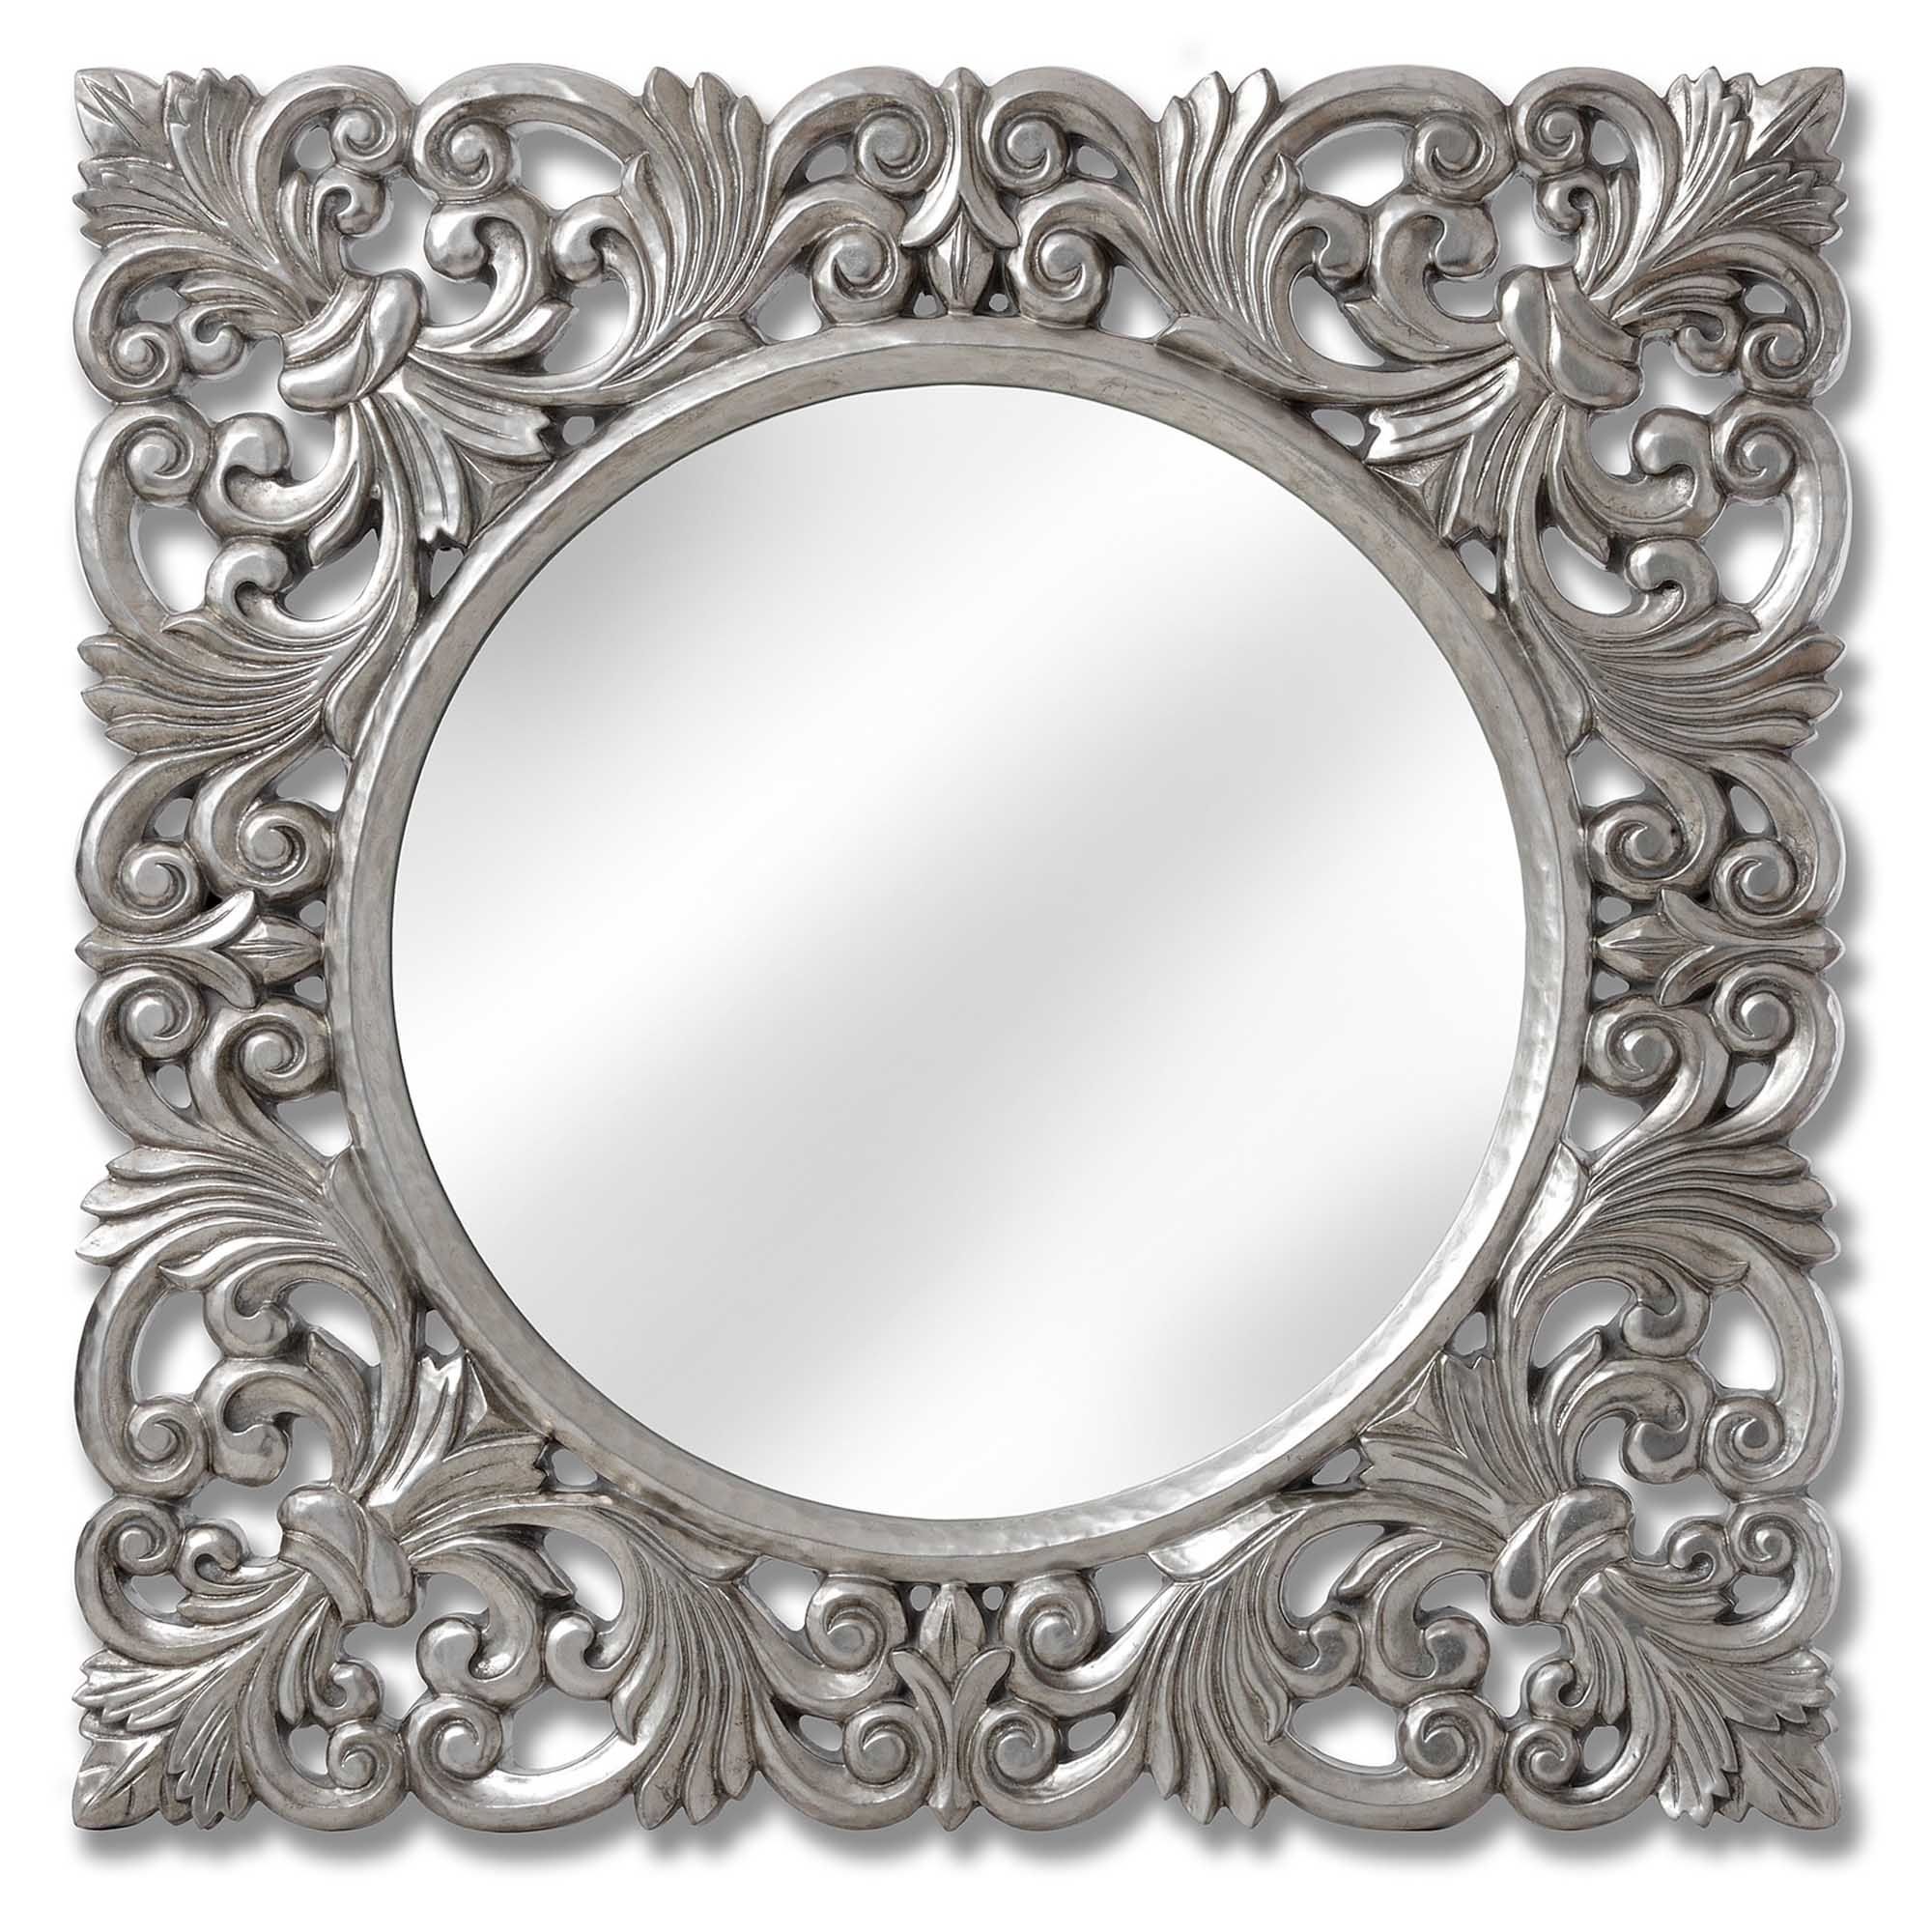 Baroque Antique French Style Silver Wall Mirror | Homesdirect365 With Silver Quatrefoil Wall Mirrors (View 3 of 15)